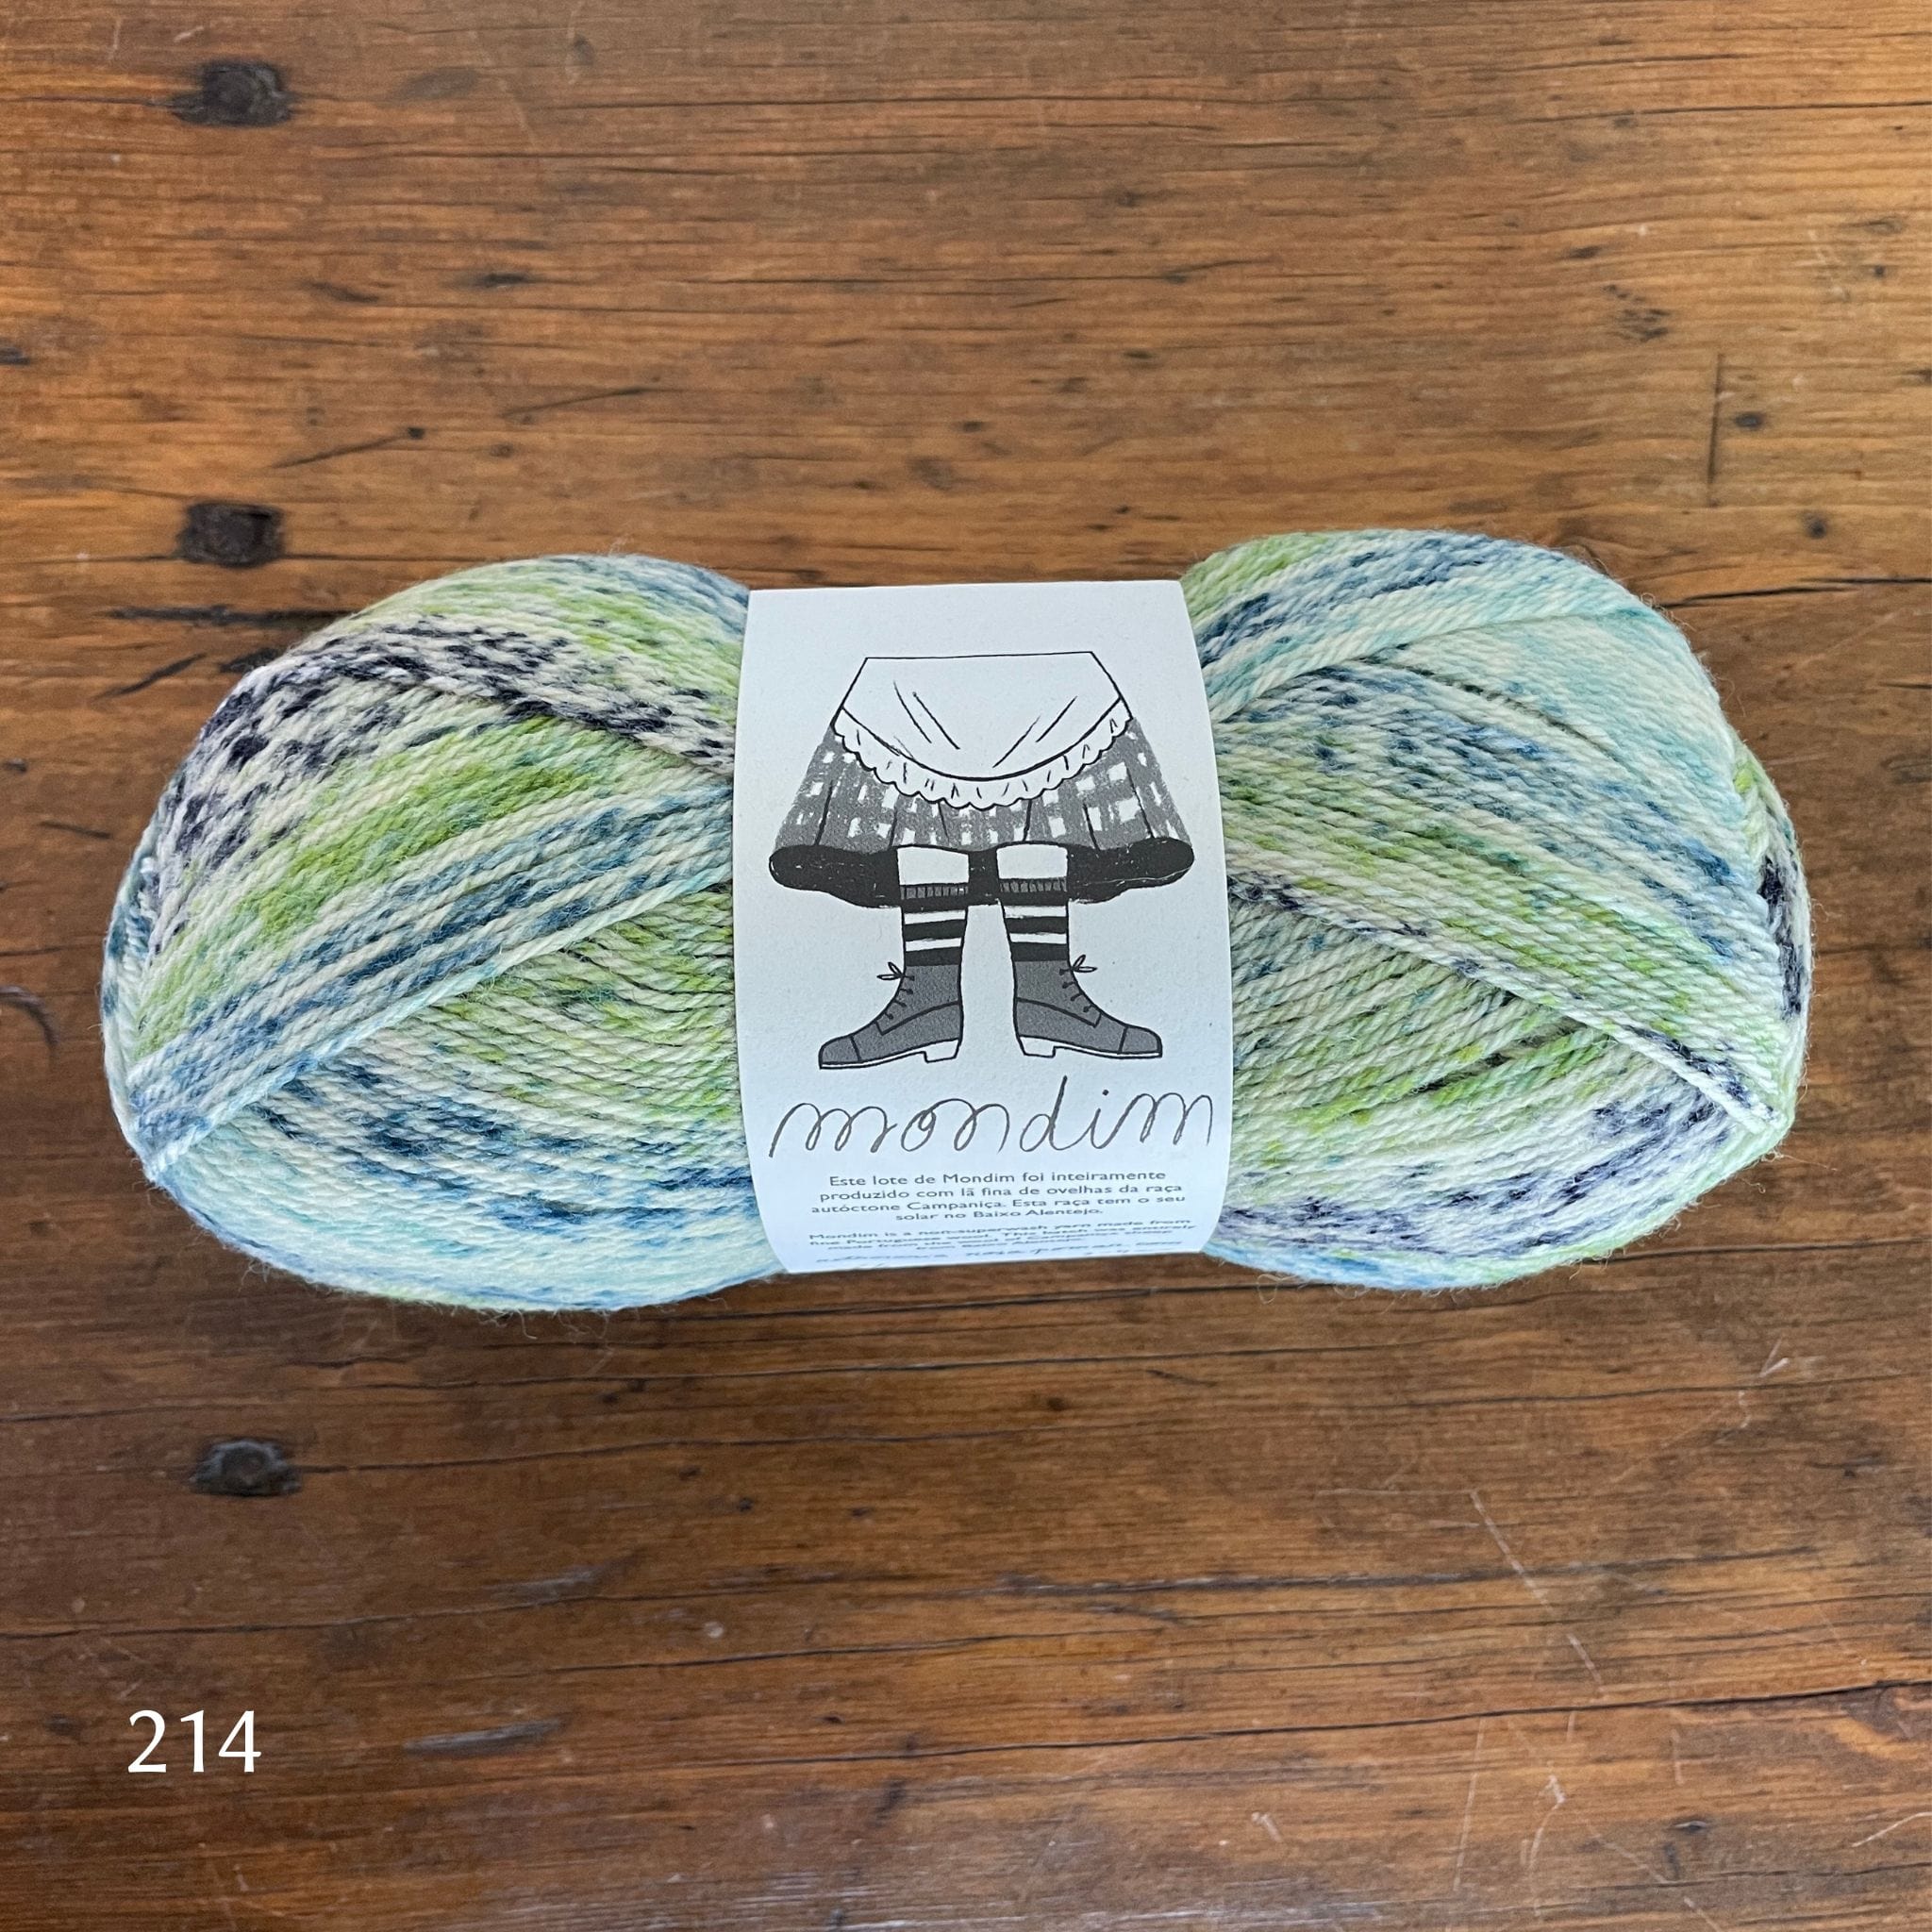 Retrosaria Mondim Fingering weight yarn shown in Color 214 variegated blues and greens. 